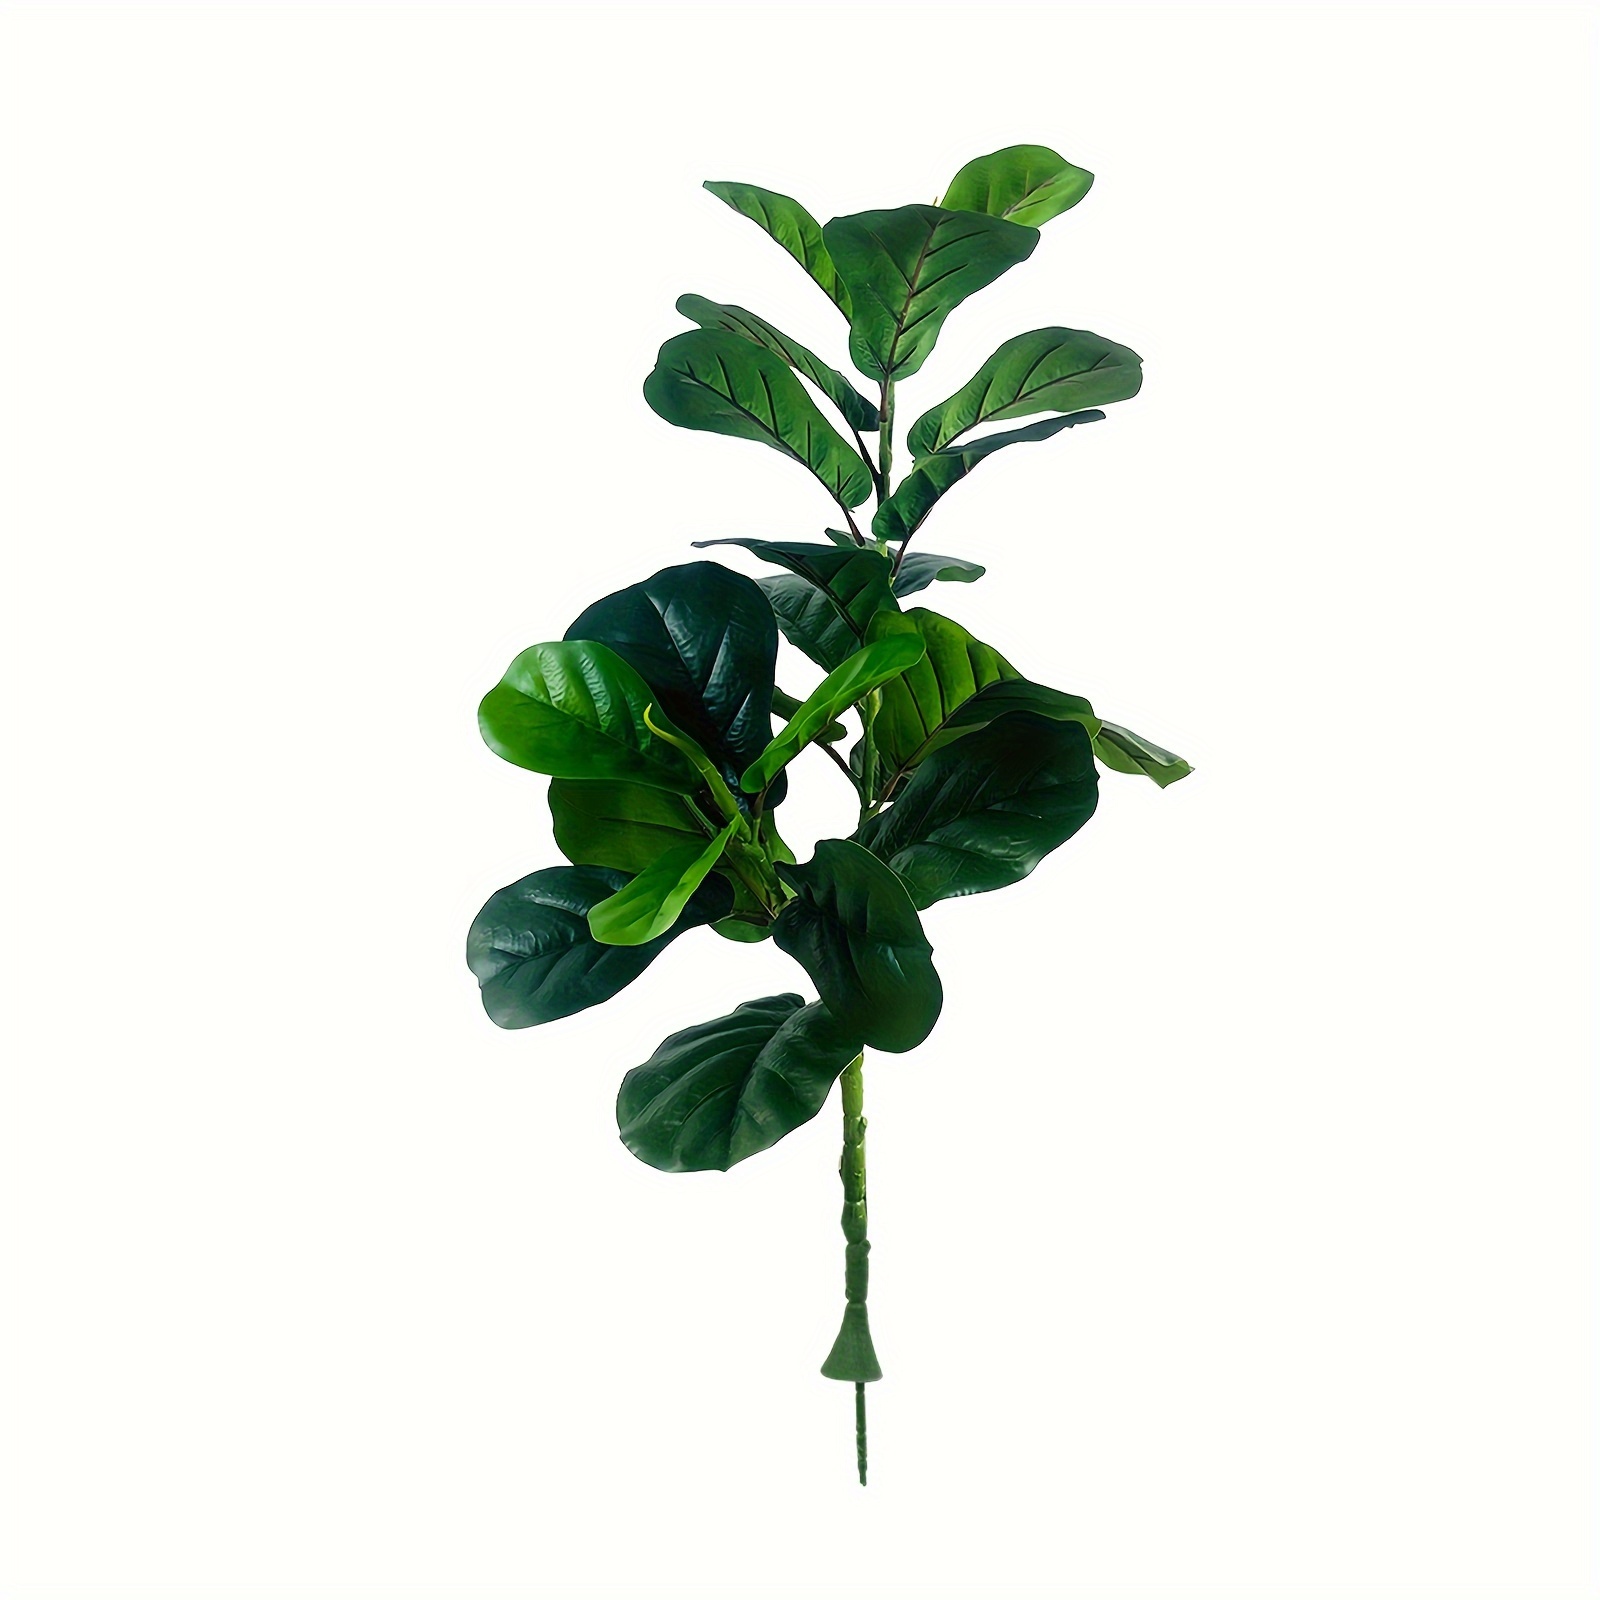 

1pc Artificial Potted Green Plant, Fake Banana Leaves With Stems, Fake Bird Of Paradise Palm Tree, Simulation Tropical Plant Green Flowers, Jungle Beach Party Home Garden Decoration (no Flowerpot)